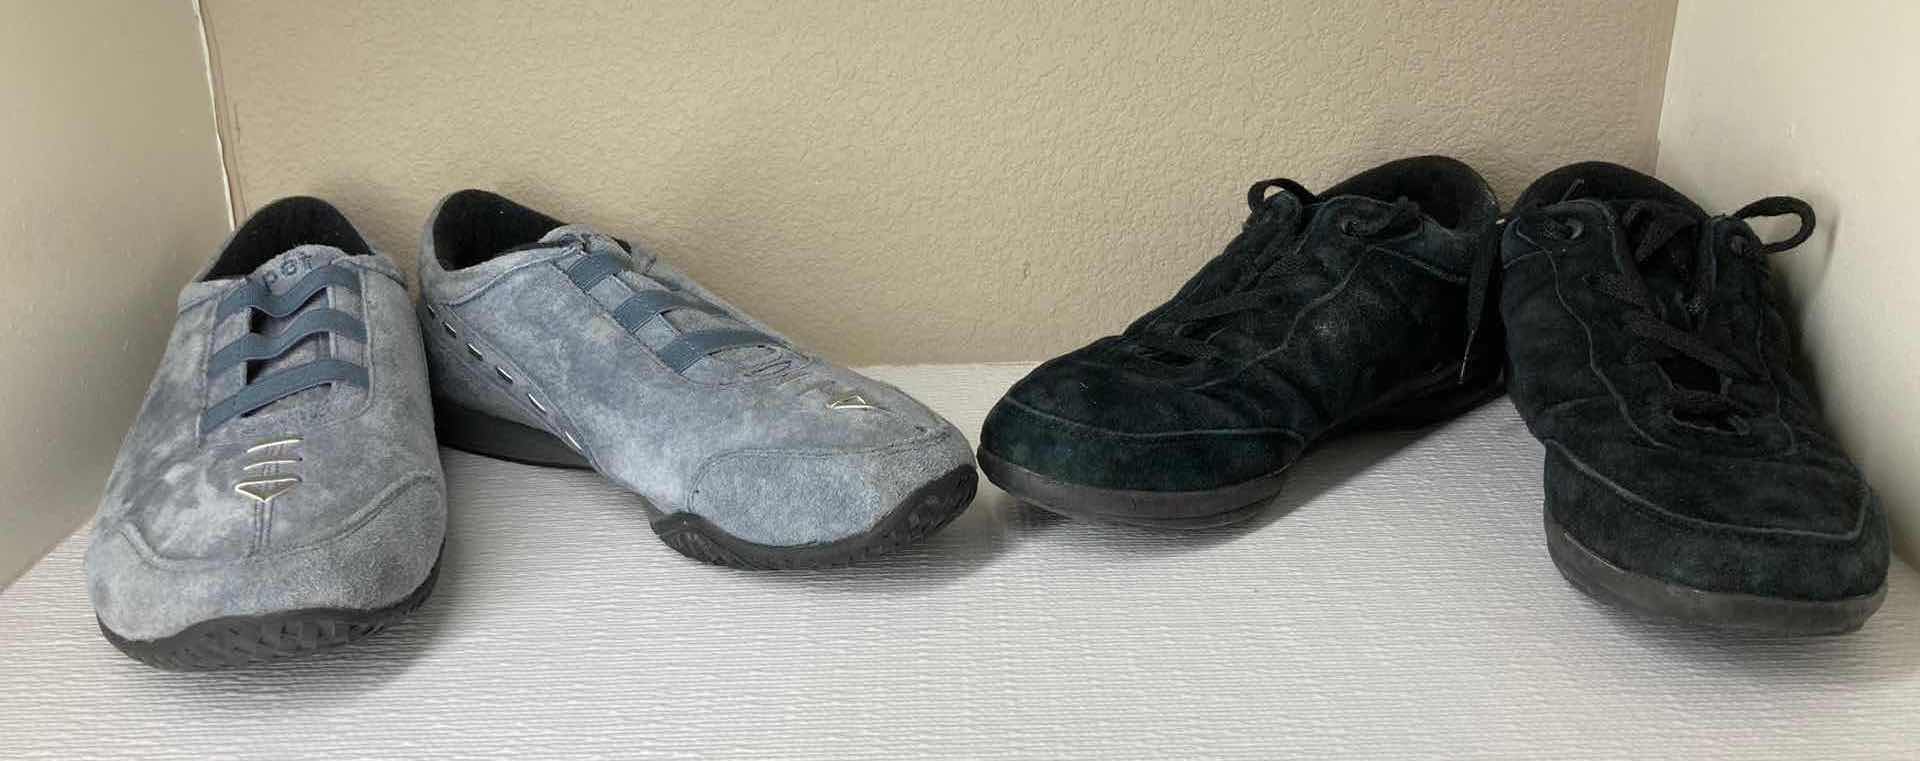 Photo 1 of PROPET GRAY SUEDE SHOES SIZE 8.5 & PROPET BLACK SUEDE SHOES SIZE 8.5